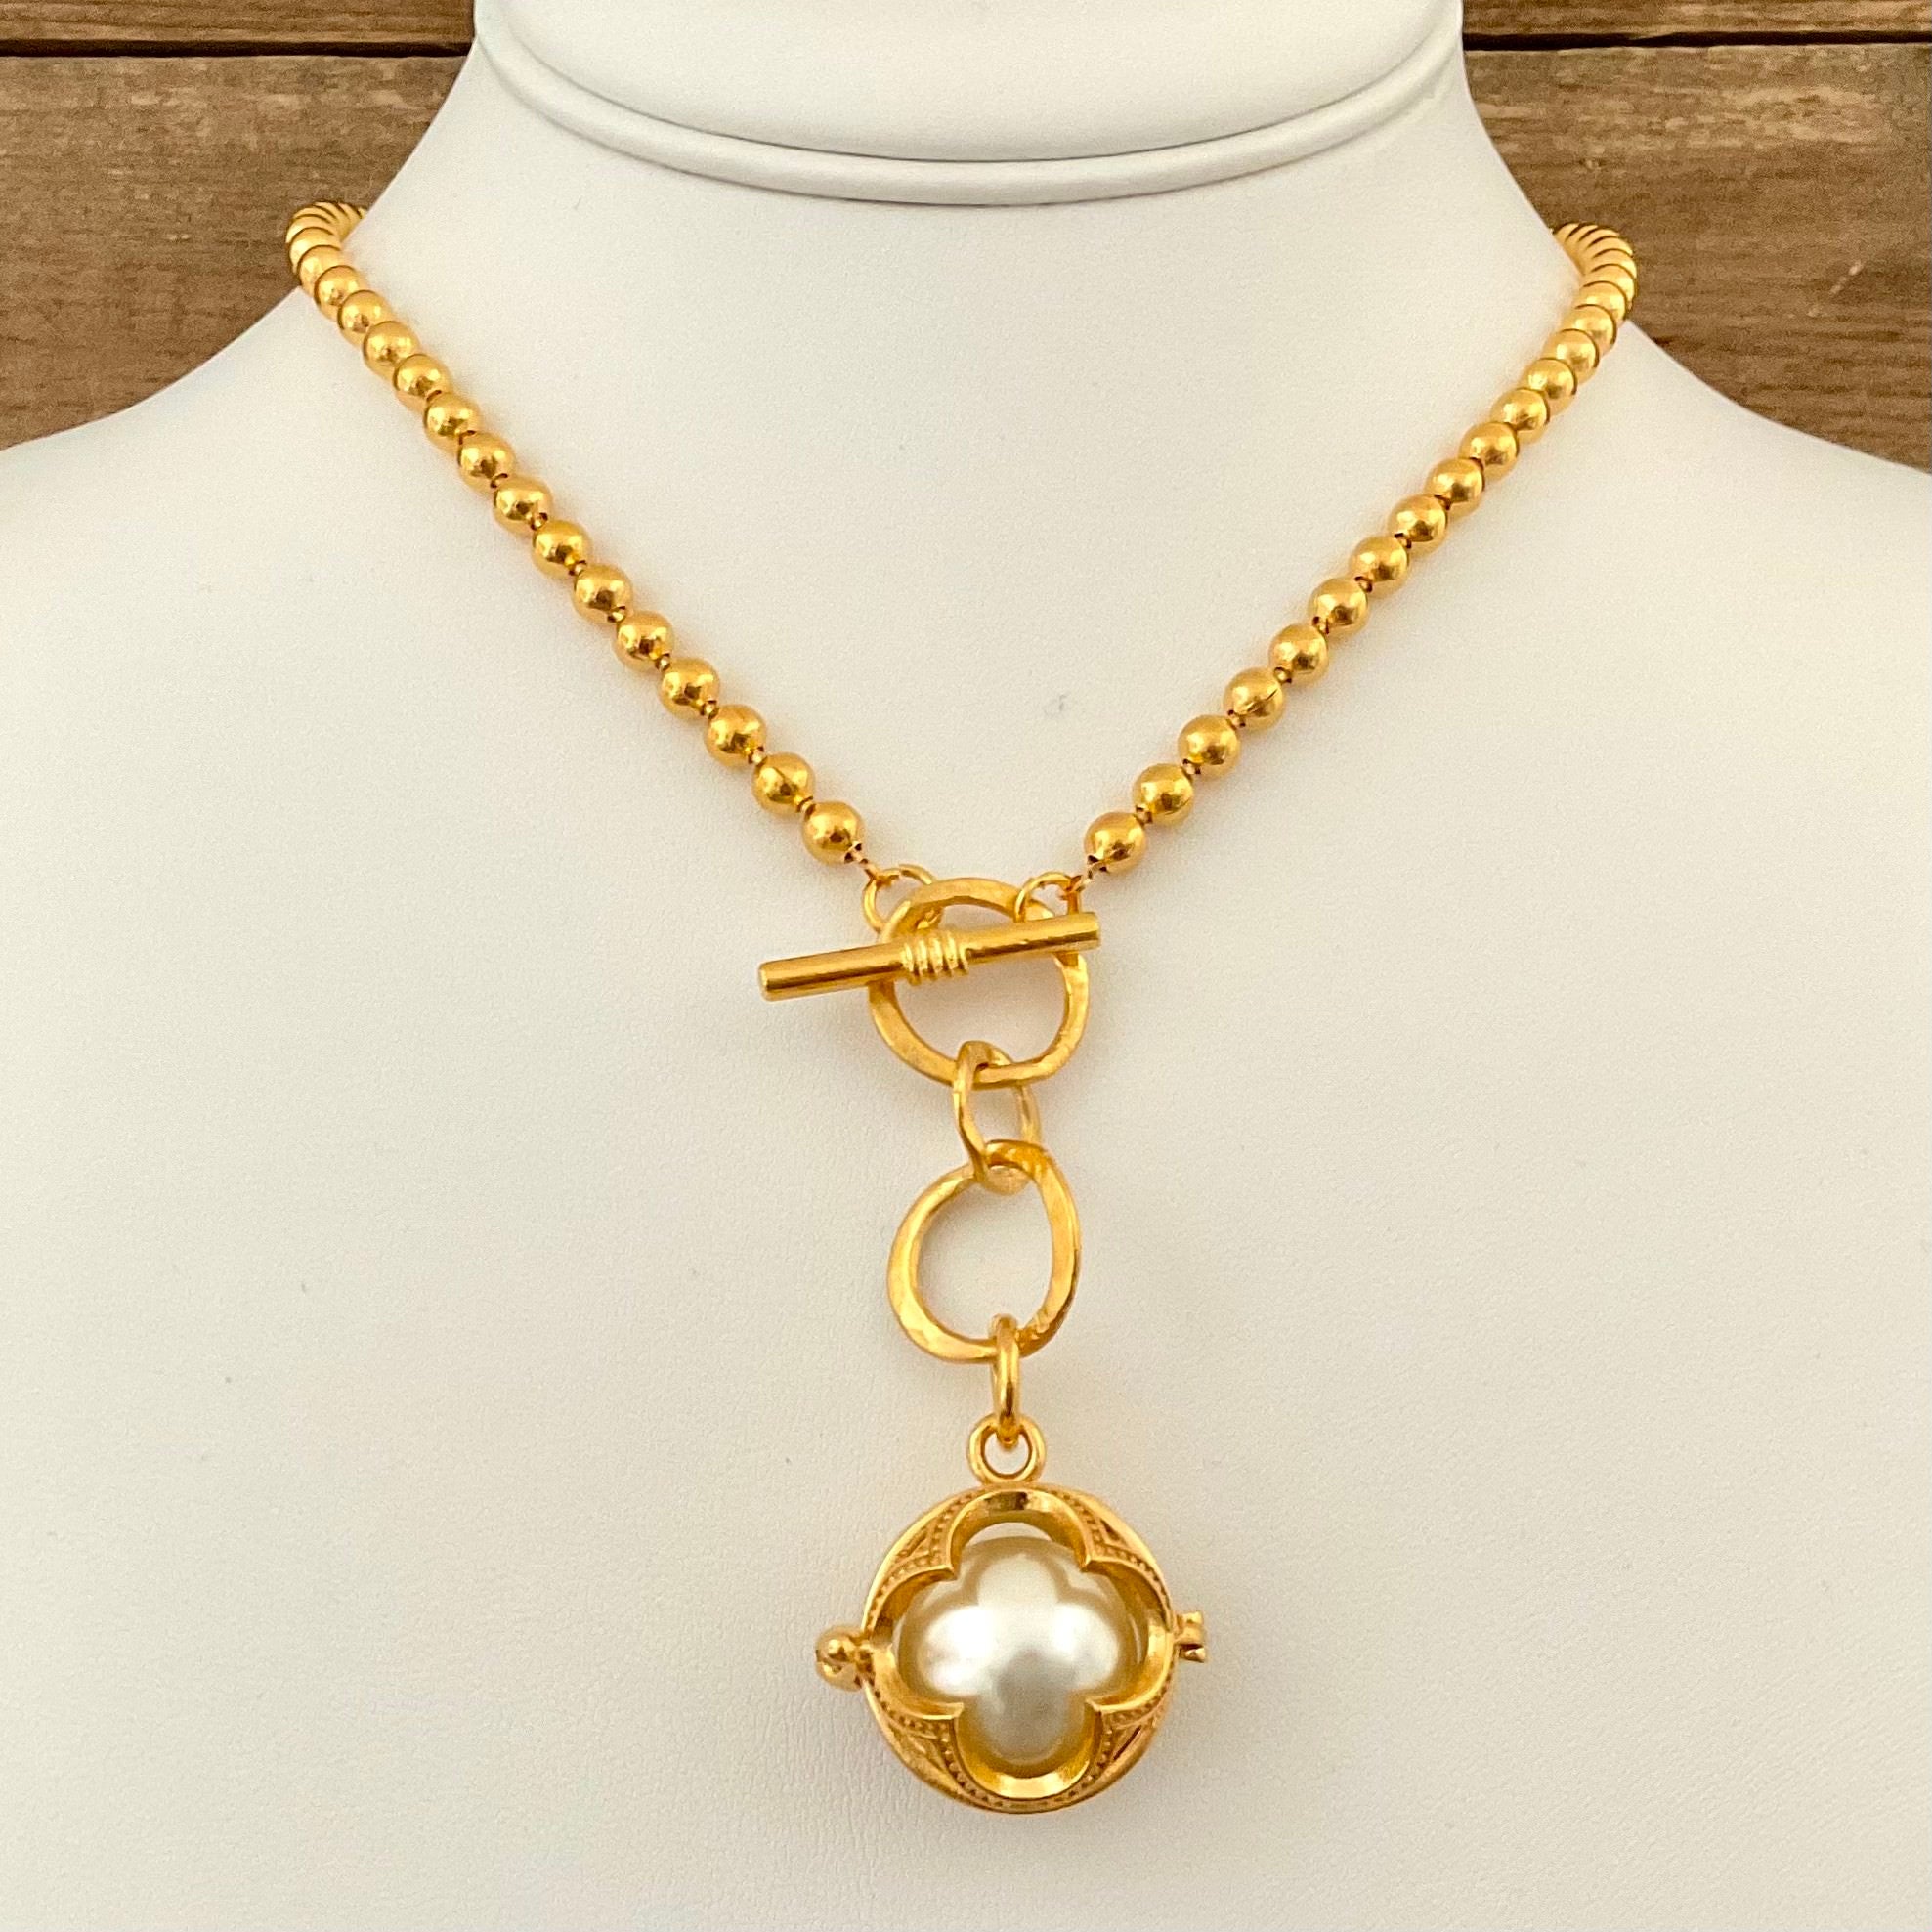 Vintage Gold Plated Chain with Pearl Pendant 18